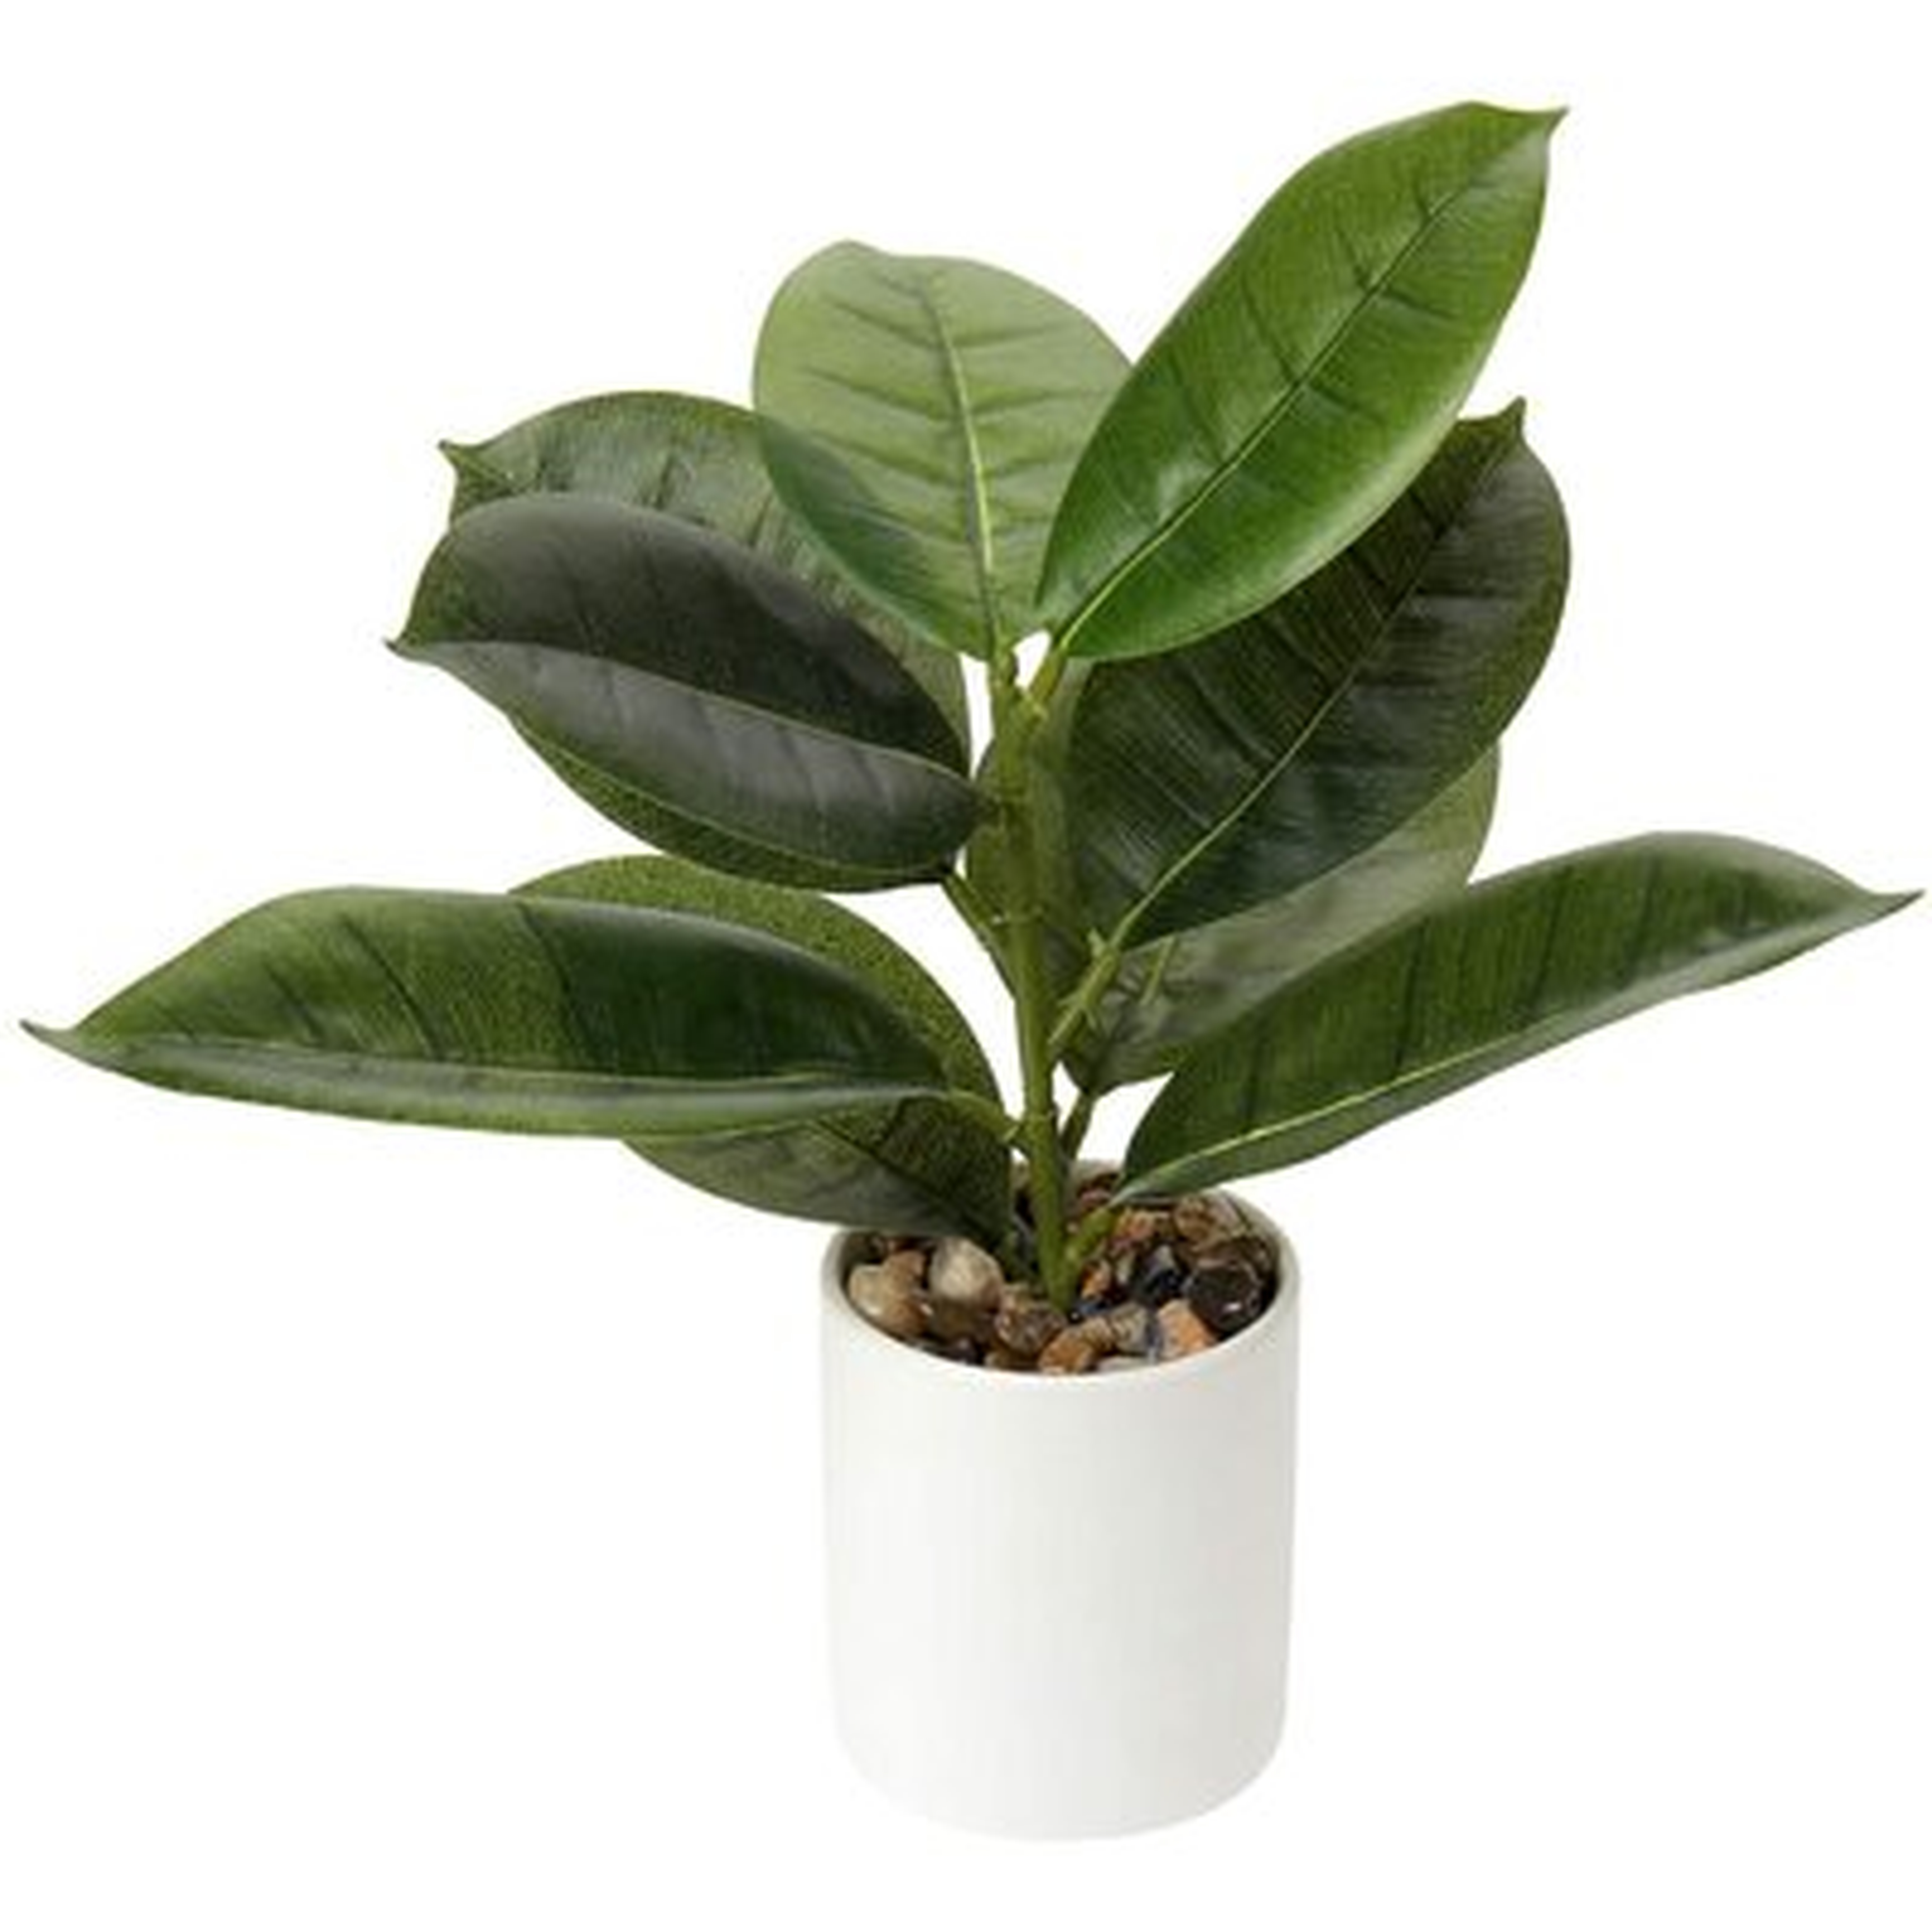 Small Fake Plants 13" Potted Plants Artificial Decor Faux Plants In Pots For Home Office Bedroom Living Room Bathroom House Shelf Desk Window Table Decorations - Wayfair